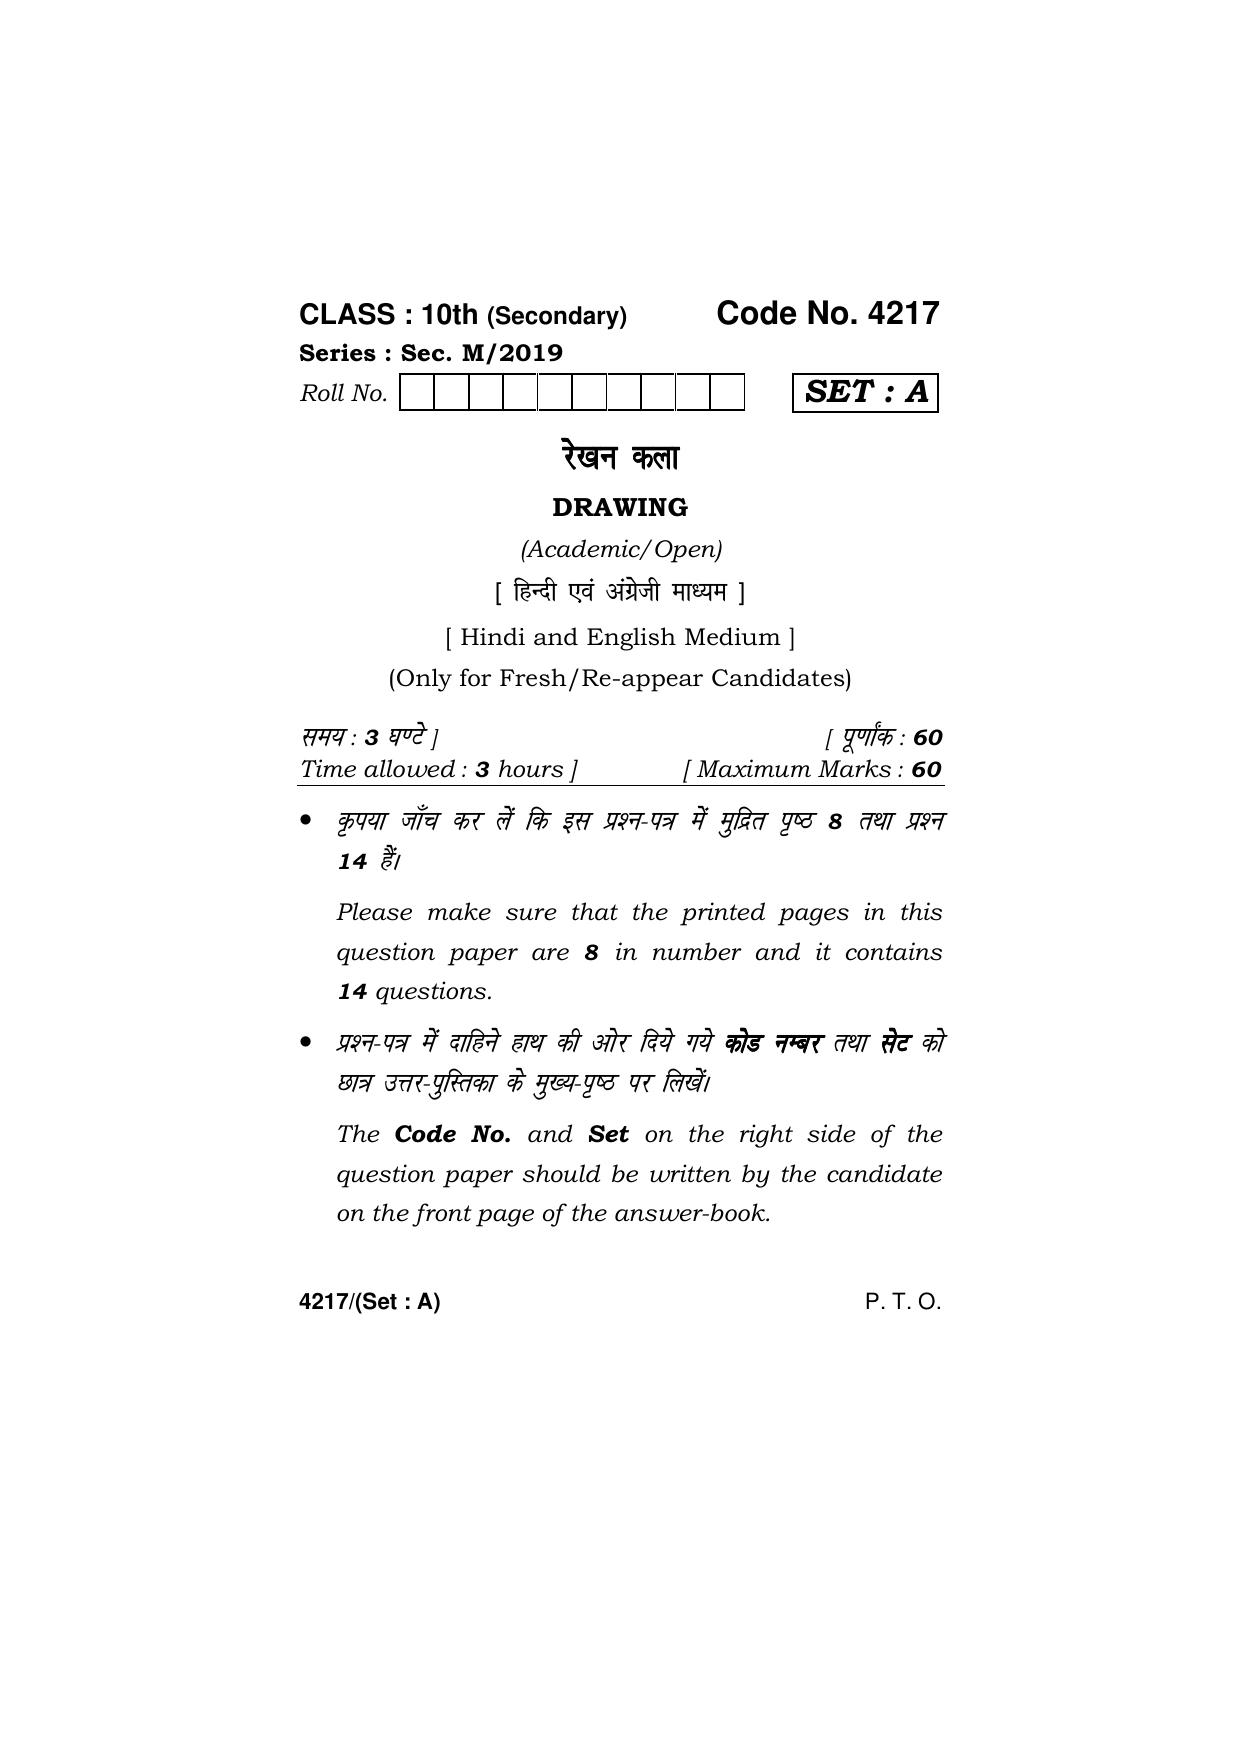 Haryana Board HBSE Class 10 Drawing (All Set) 2019 Question Paper - Page 1